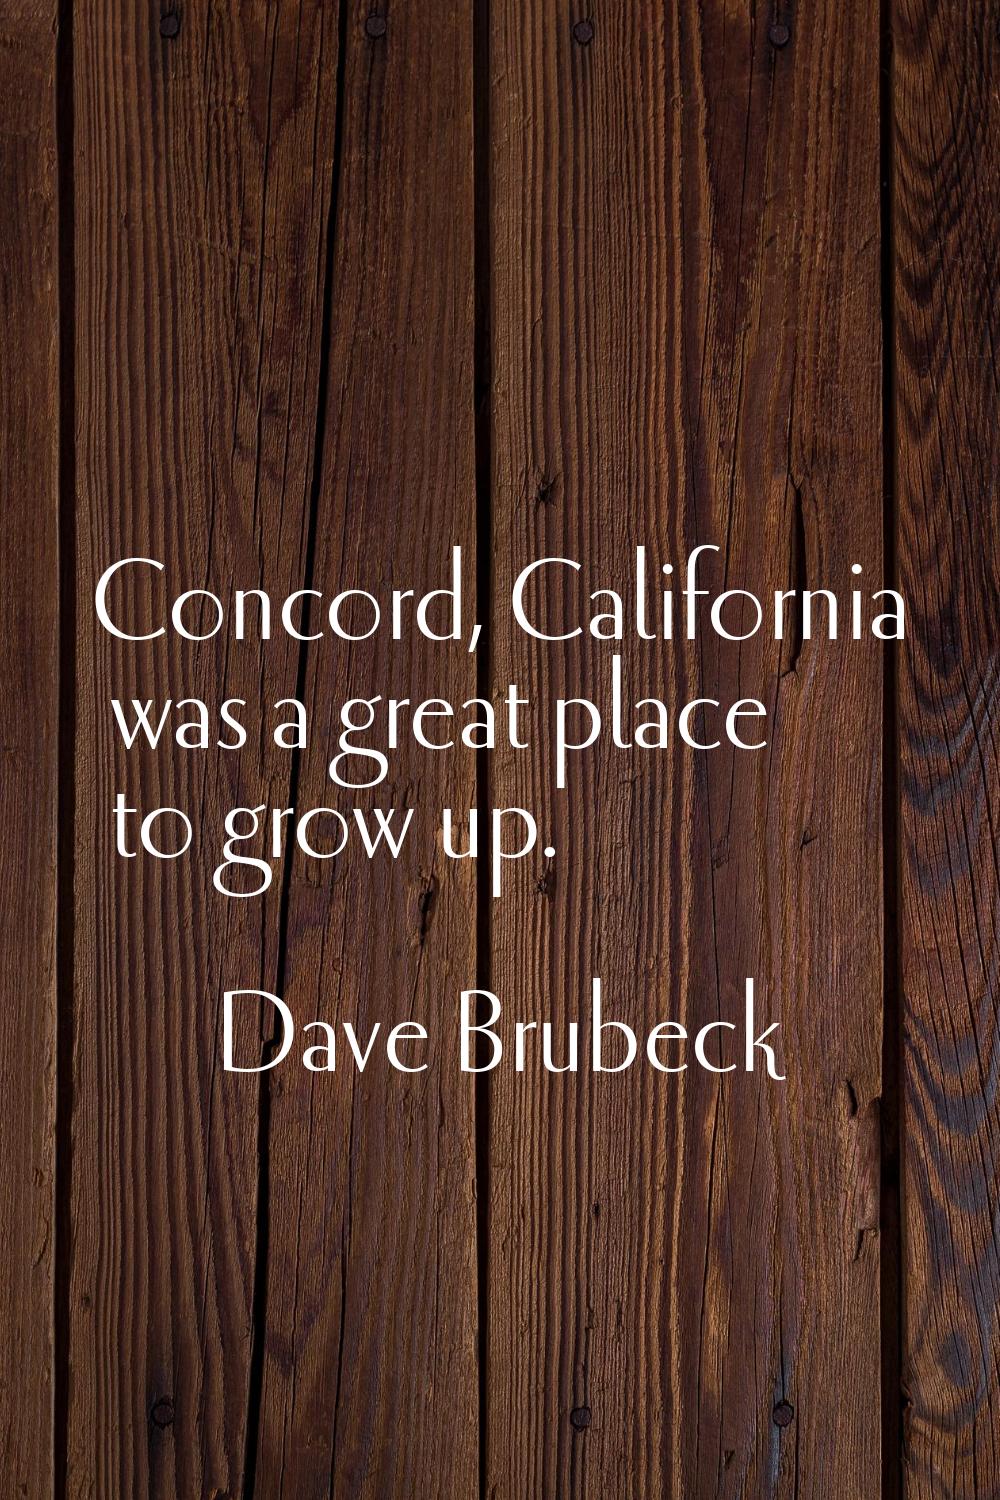 Concord, California was a great place to grow up.